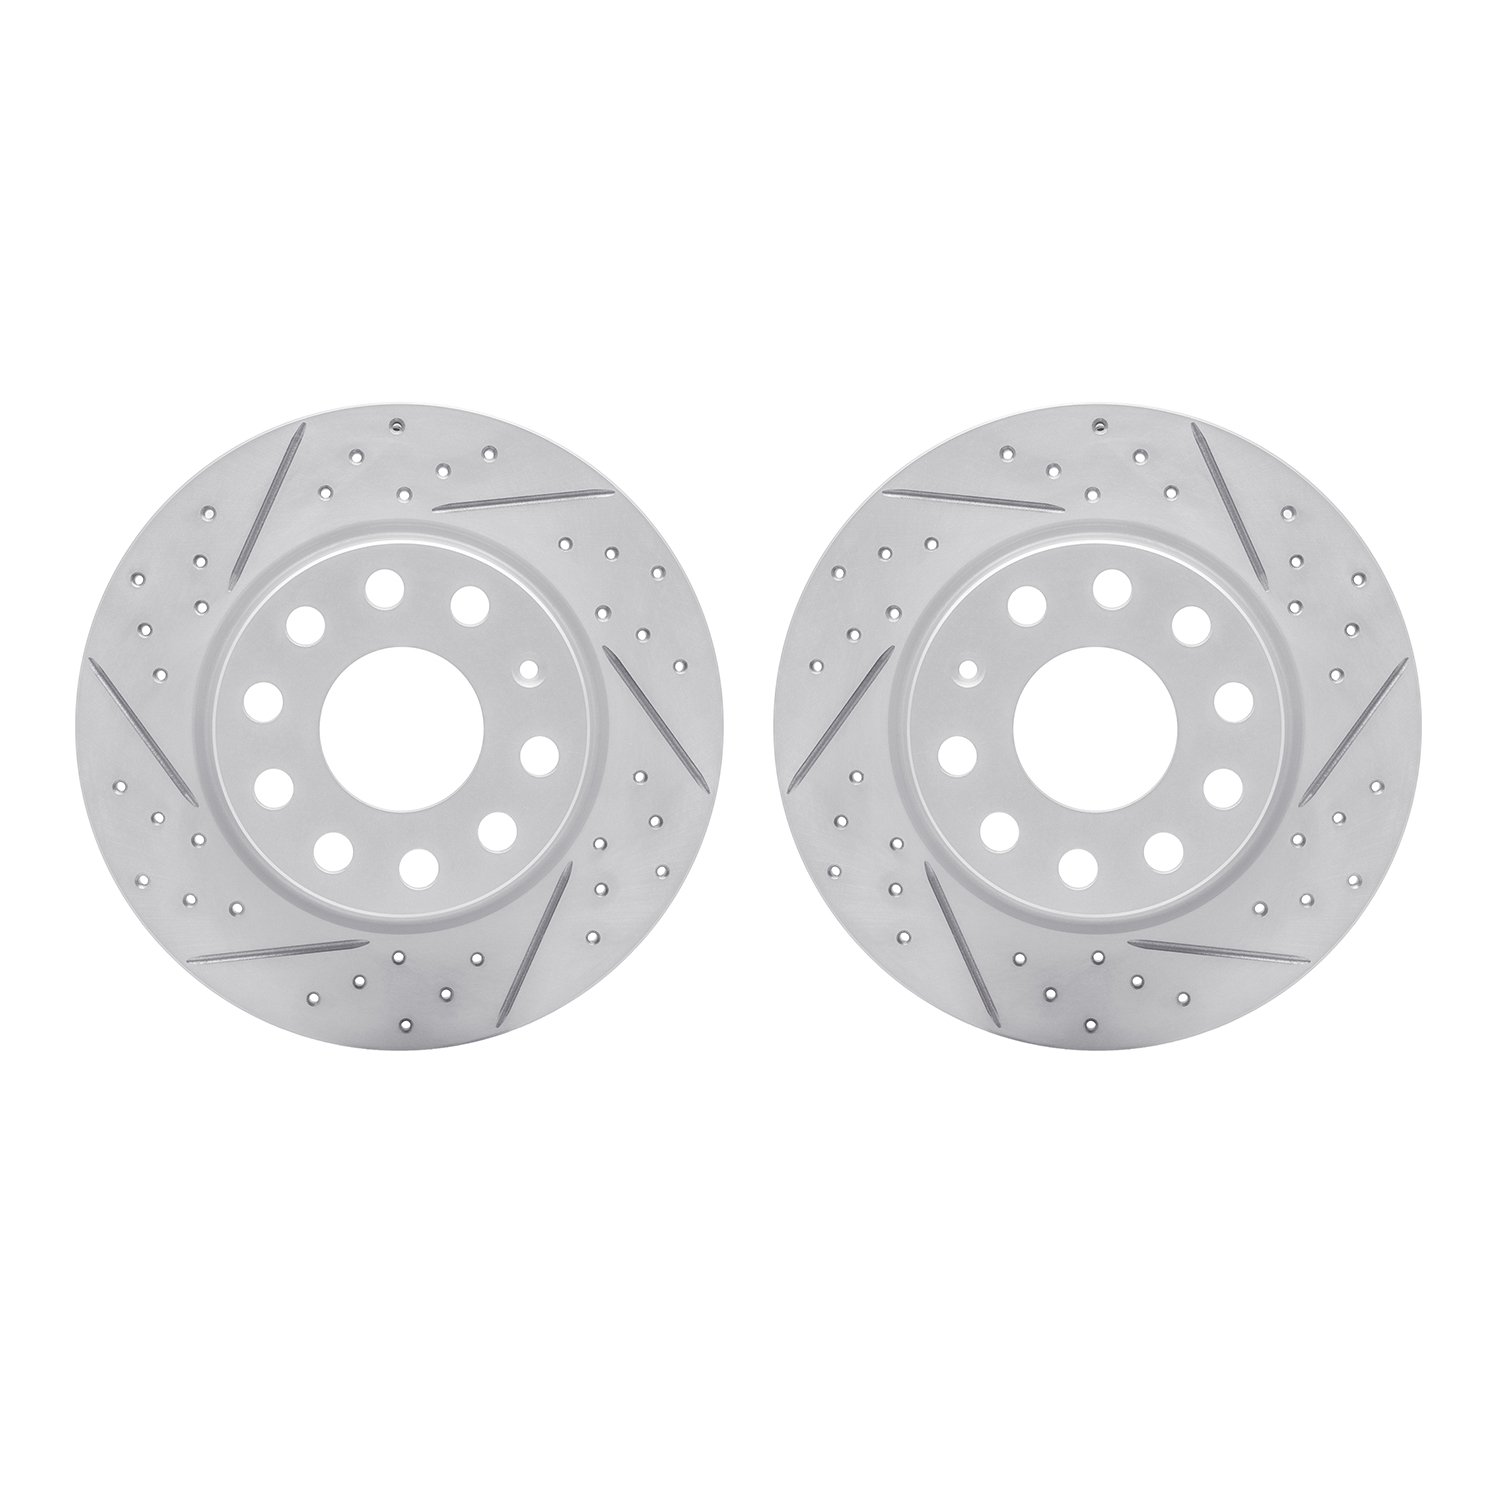 2002-74030 Geoperformance Drilled/Slotted Brake Rotors, Fits Select Audi/Volkswagen, Position: Rear